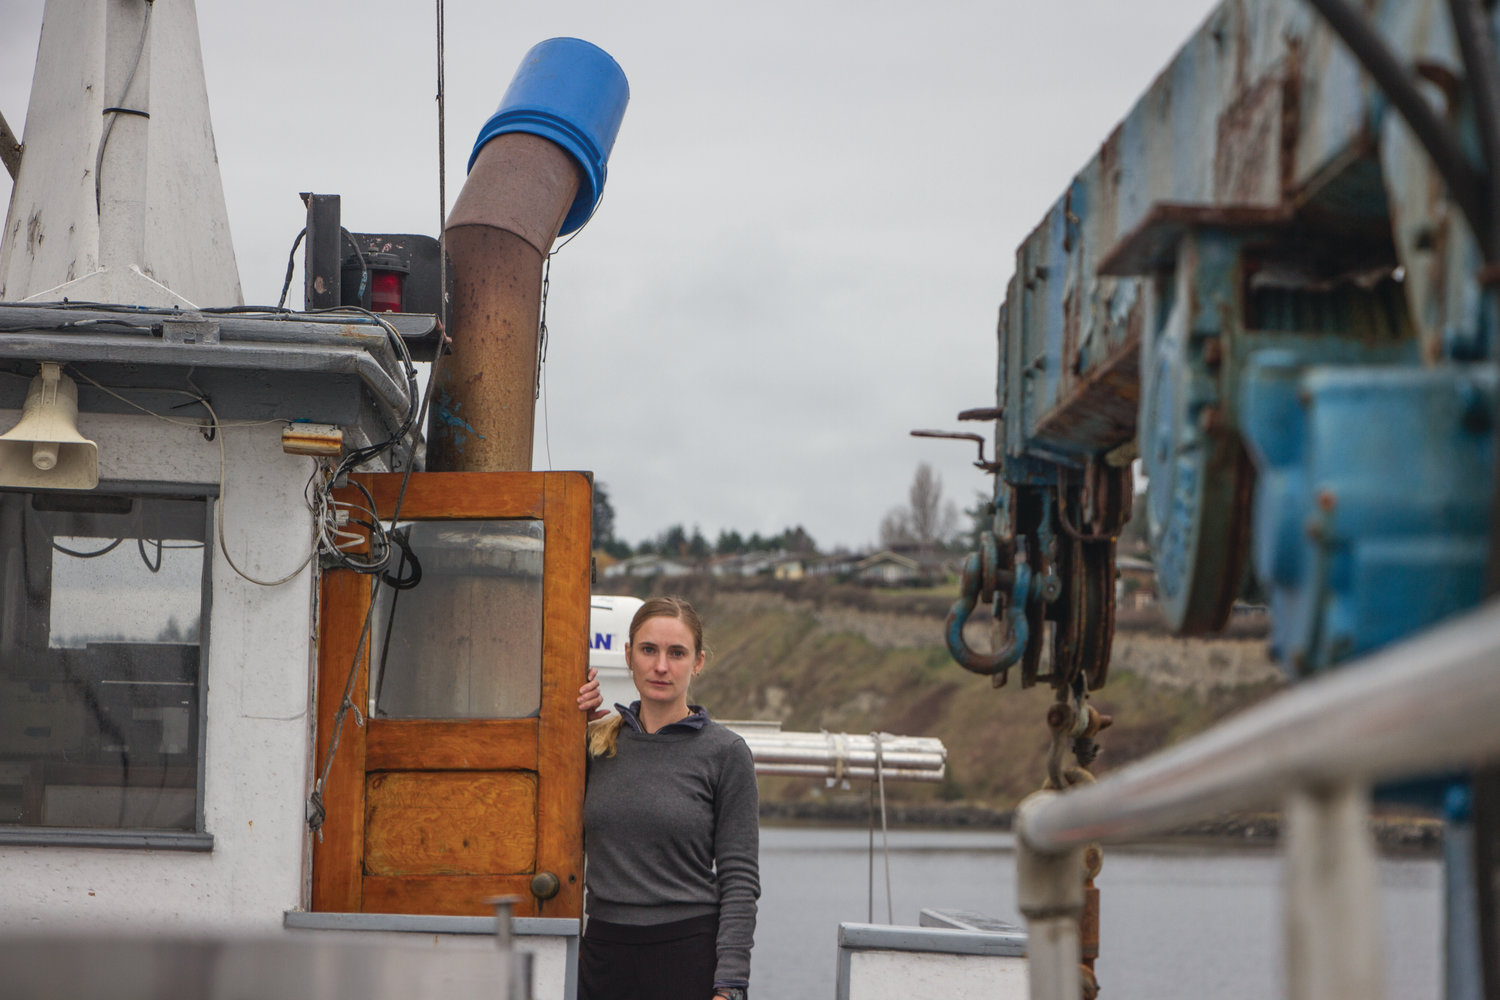 Rebecca Argo at the wheelhouse of the 76-foot scow Sunnyvale, a salmon tender, which she captained last summer. Argo’s salmon tender operates out of Port Townsend’s Boat Haven, serving southeast Alaska. Her experiences as skipper brought her to Rome in November, where she spoke at the United Nations sustainable fisheries conference.